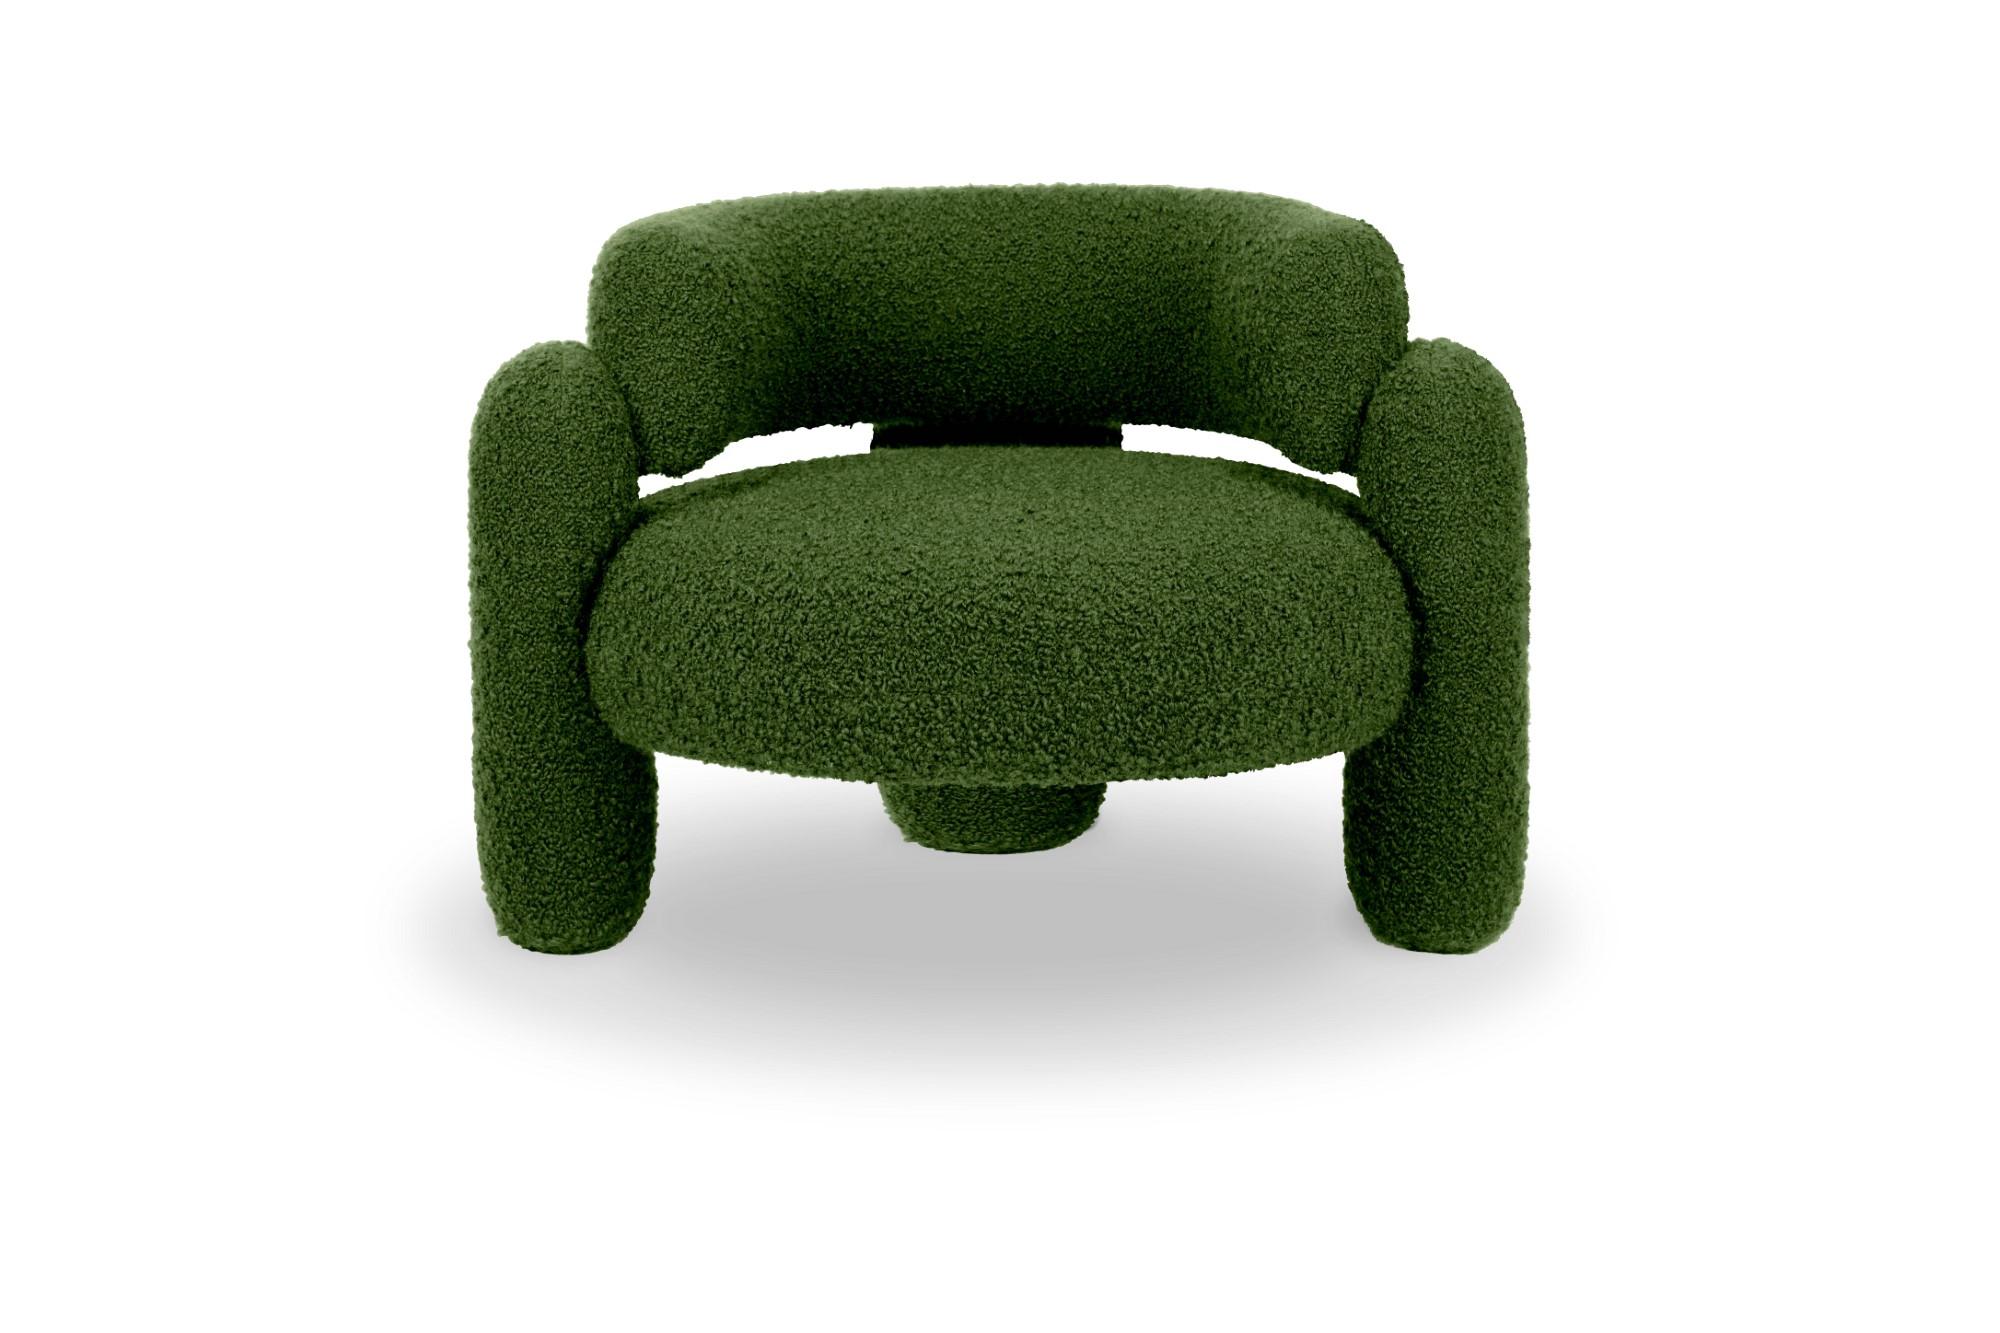 Embrace cormo emerald armchair by Royal Stranger
Dimensions: W 96 x D 85 x H 68 cm.
Different upholstery colors and finishes are available.
Materials: Upholstery.

Featuring an enfolding composition of geometrical shapes, the Embrace Armchair